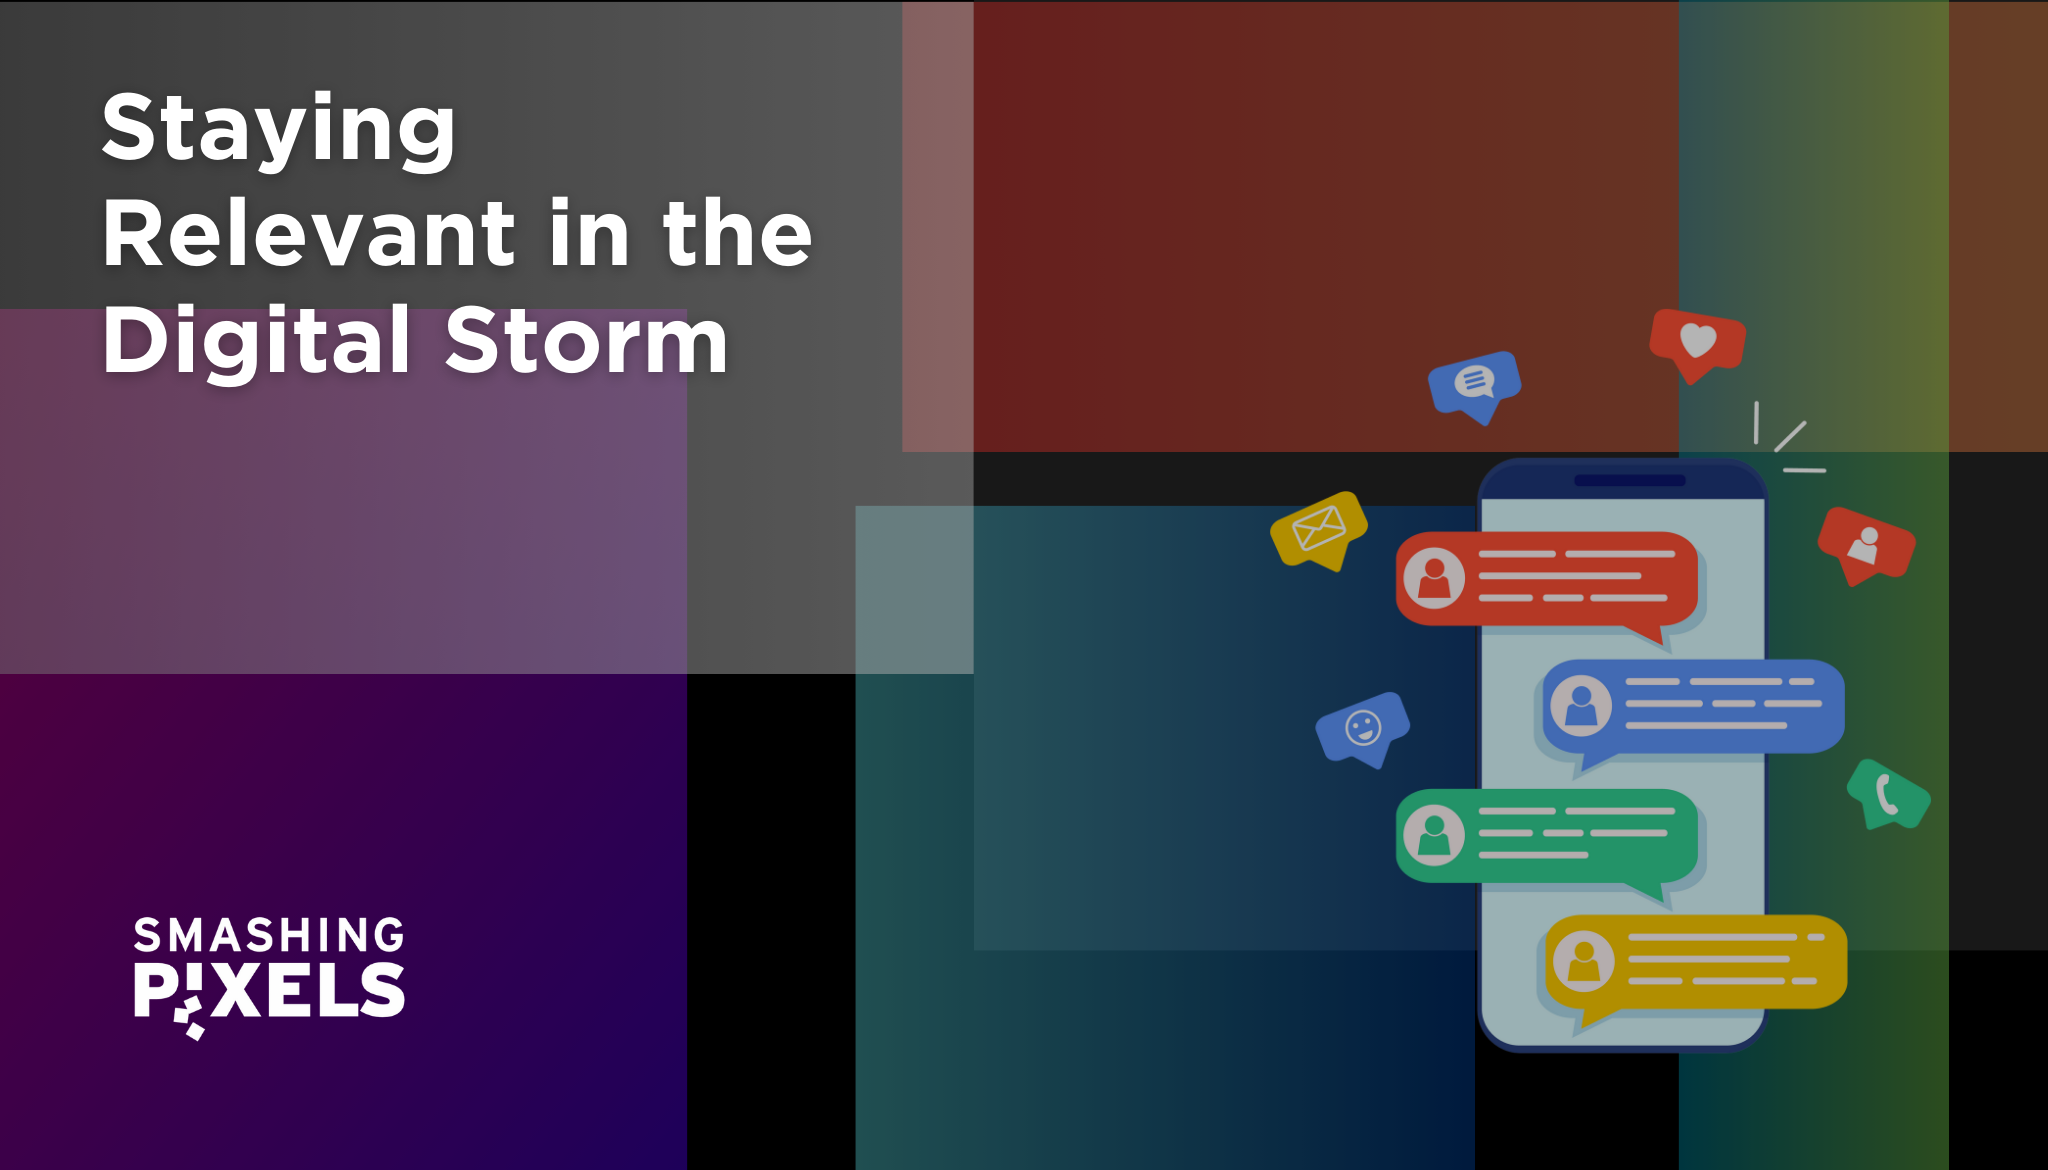 Staying Relevant in the Digital Storm: The Power of S.M.A.R.T. Socials